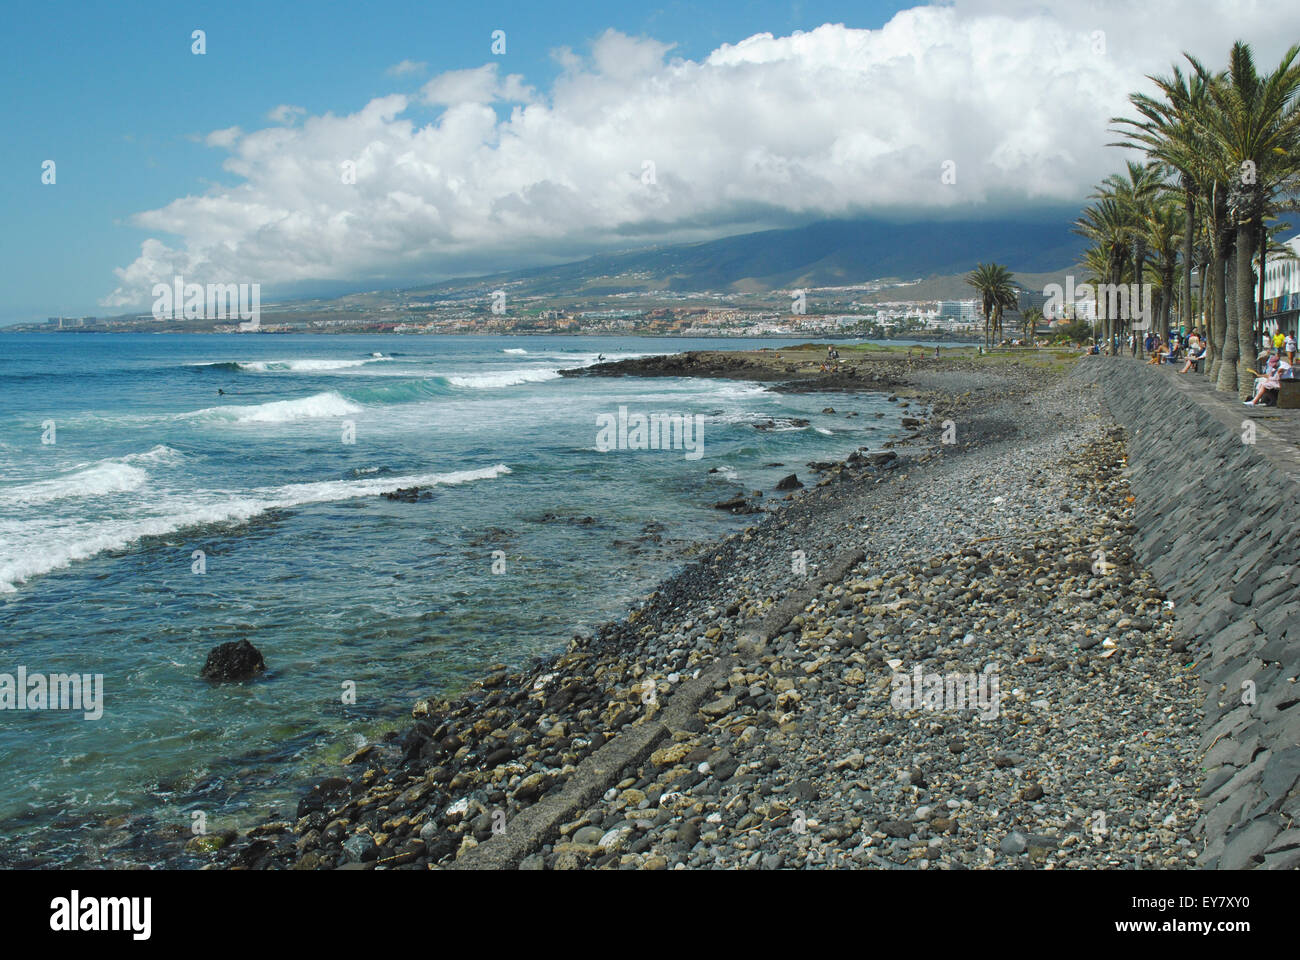 Stormy clouds over the mountains viewed from Los Cristianos, Tenerife, Spain Stock Photo